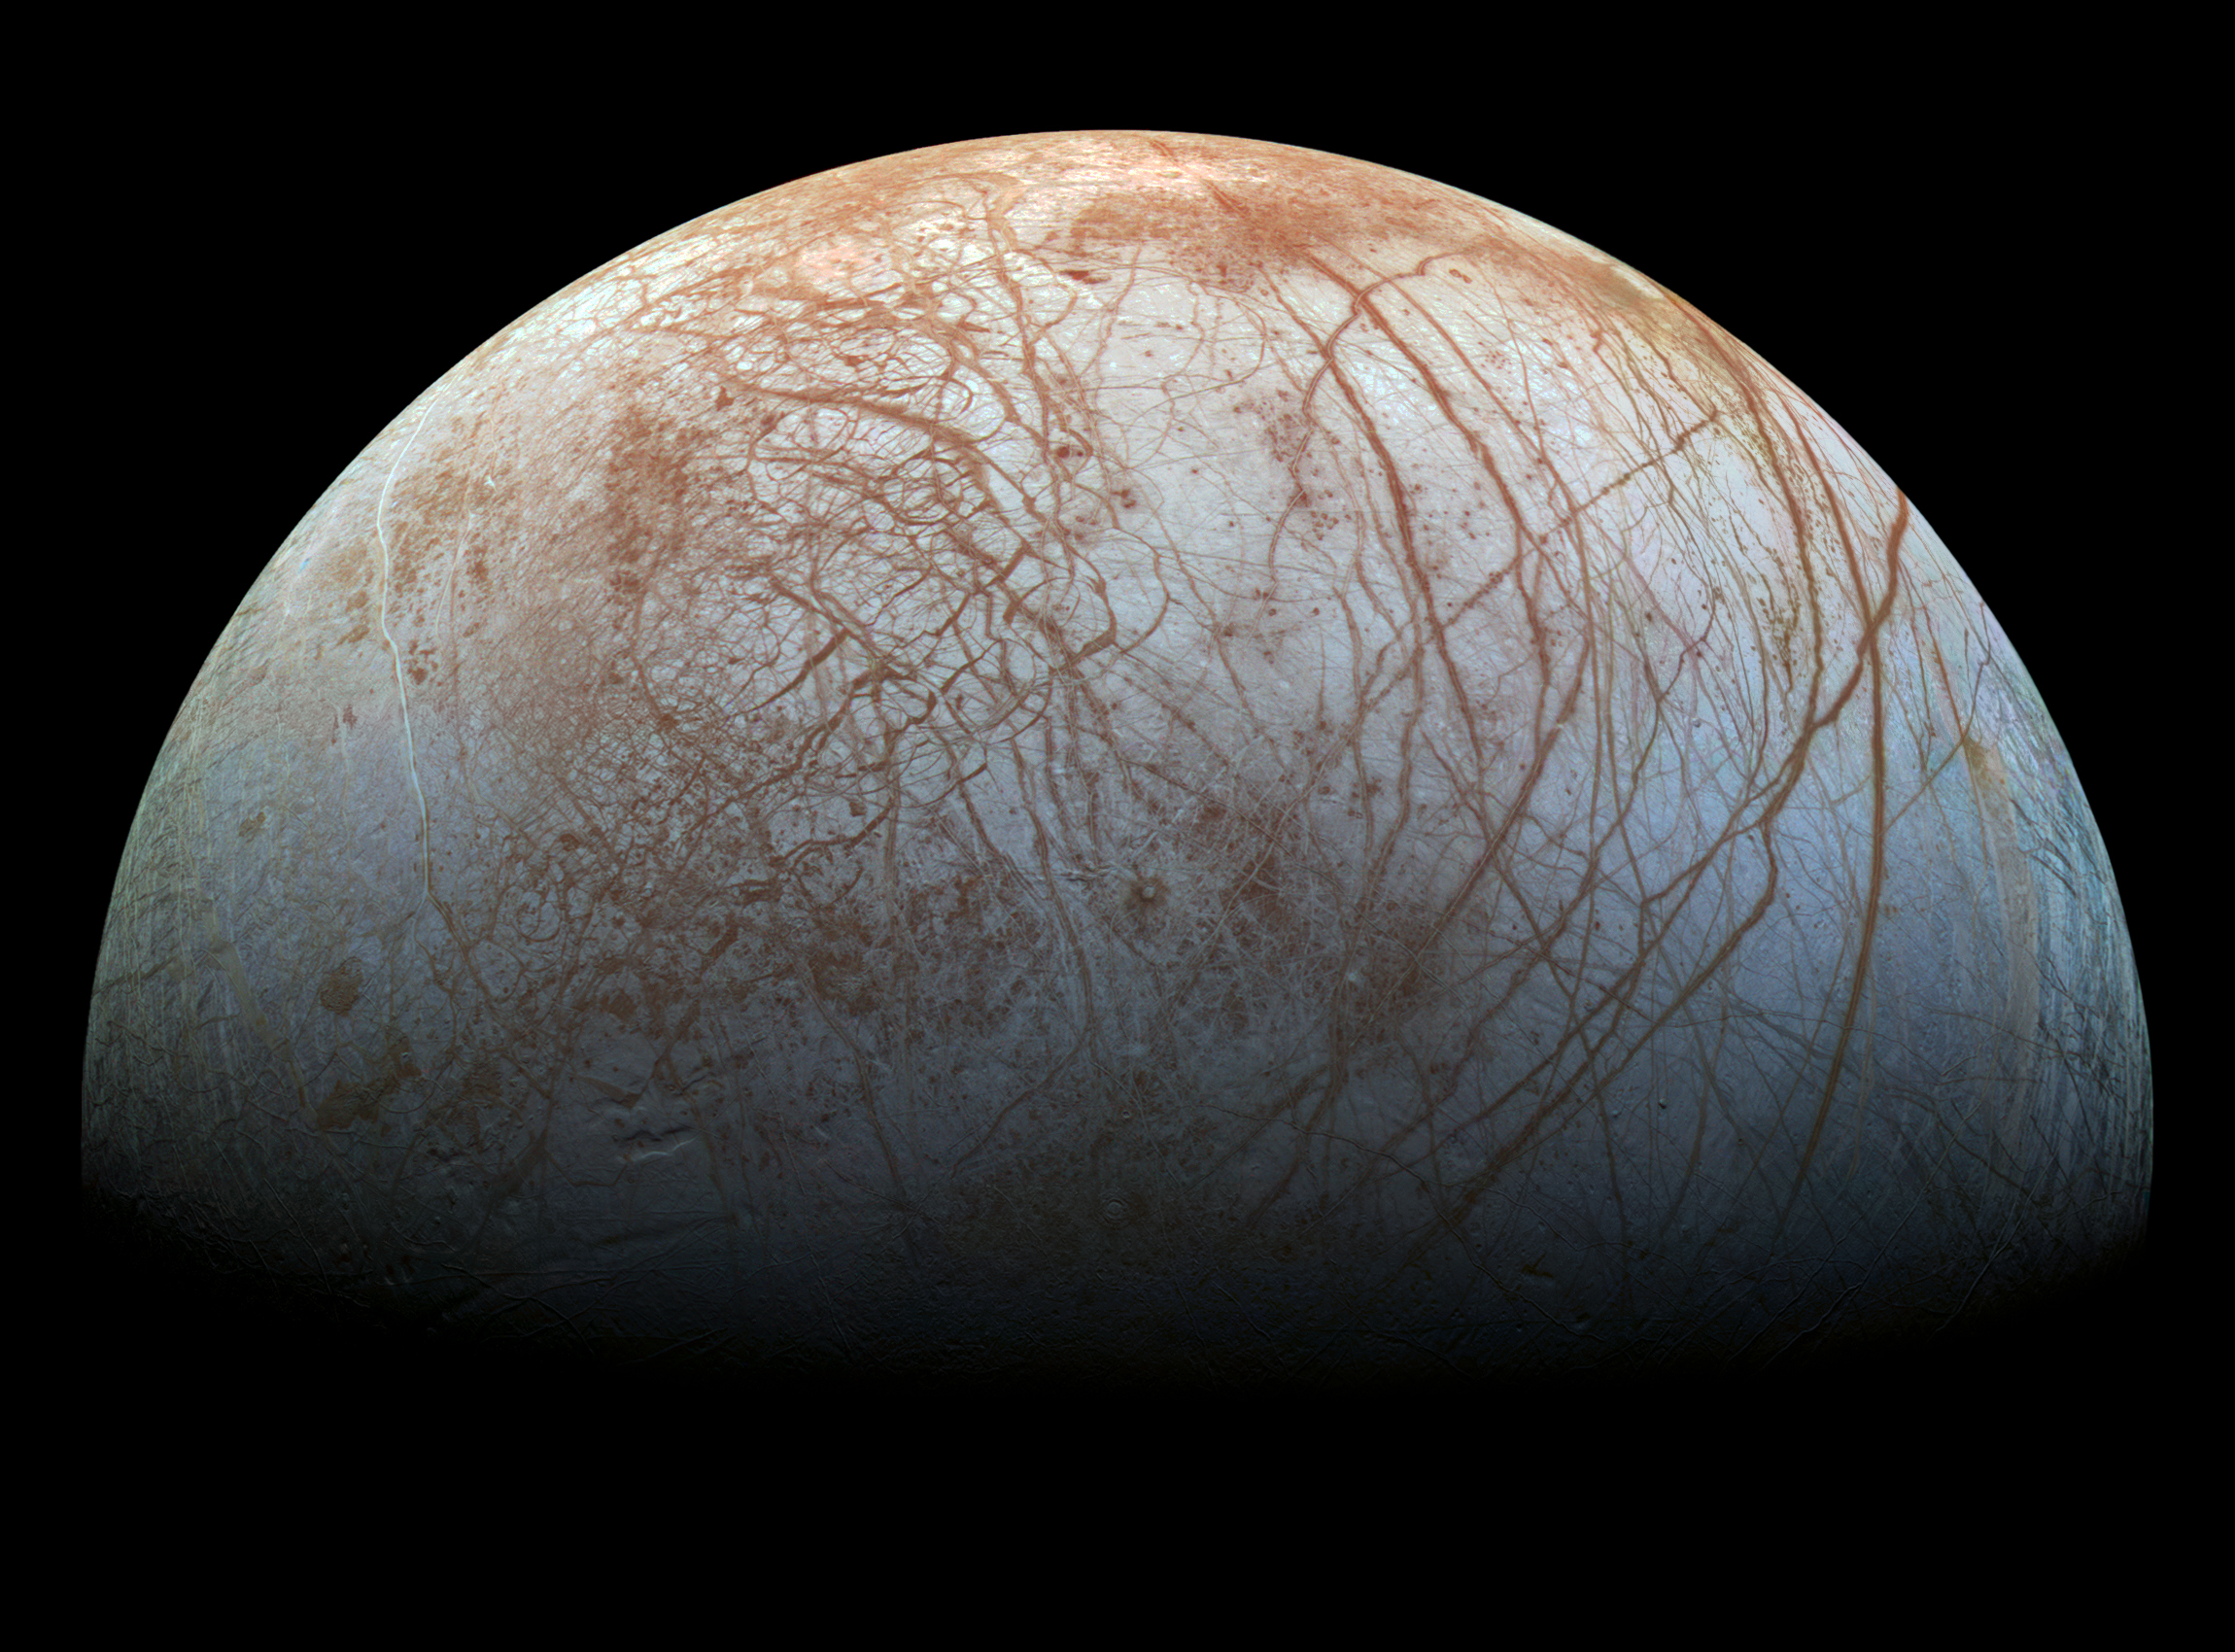 Scientists are almost certain that hidden beneath the icy surface of Europa is a saltwater ocean thought to contain about twice as much water as Earth’s global ocean. It may be the most promising place in our solar system to find present-day environments suitable for some form of life beyond Earth.